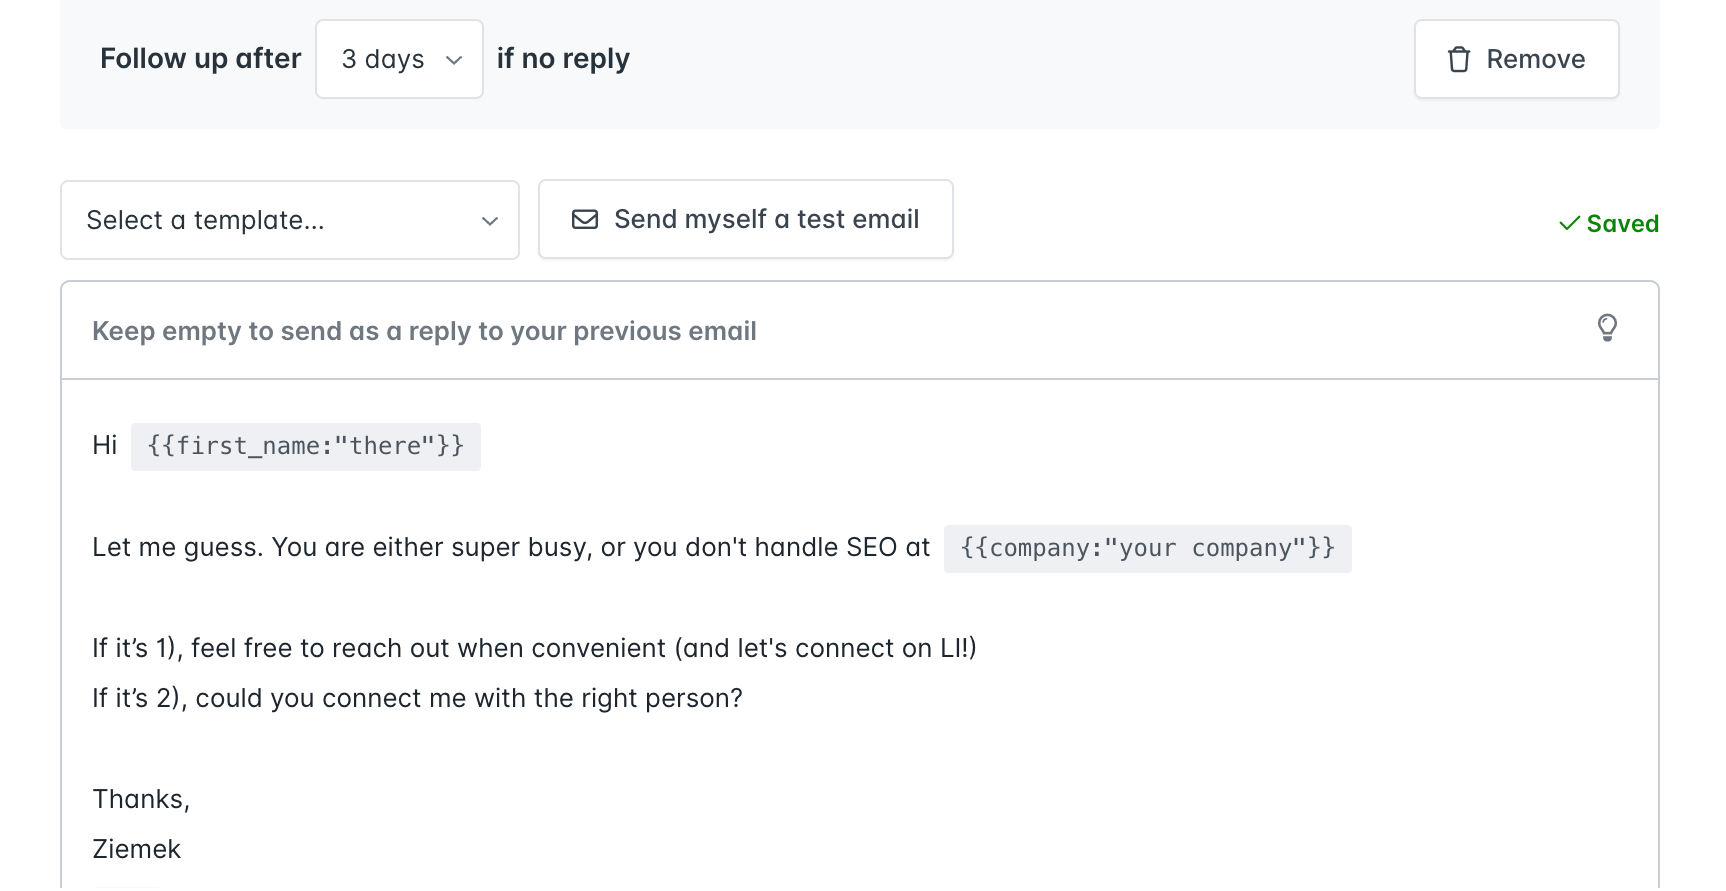 Rejection-Then-Retreat: How To Change Your CTA After No Reply